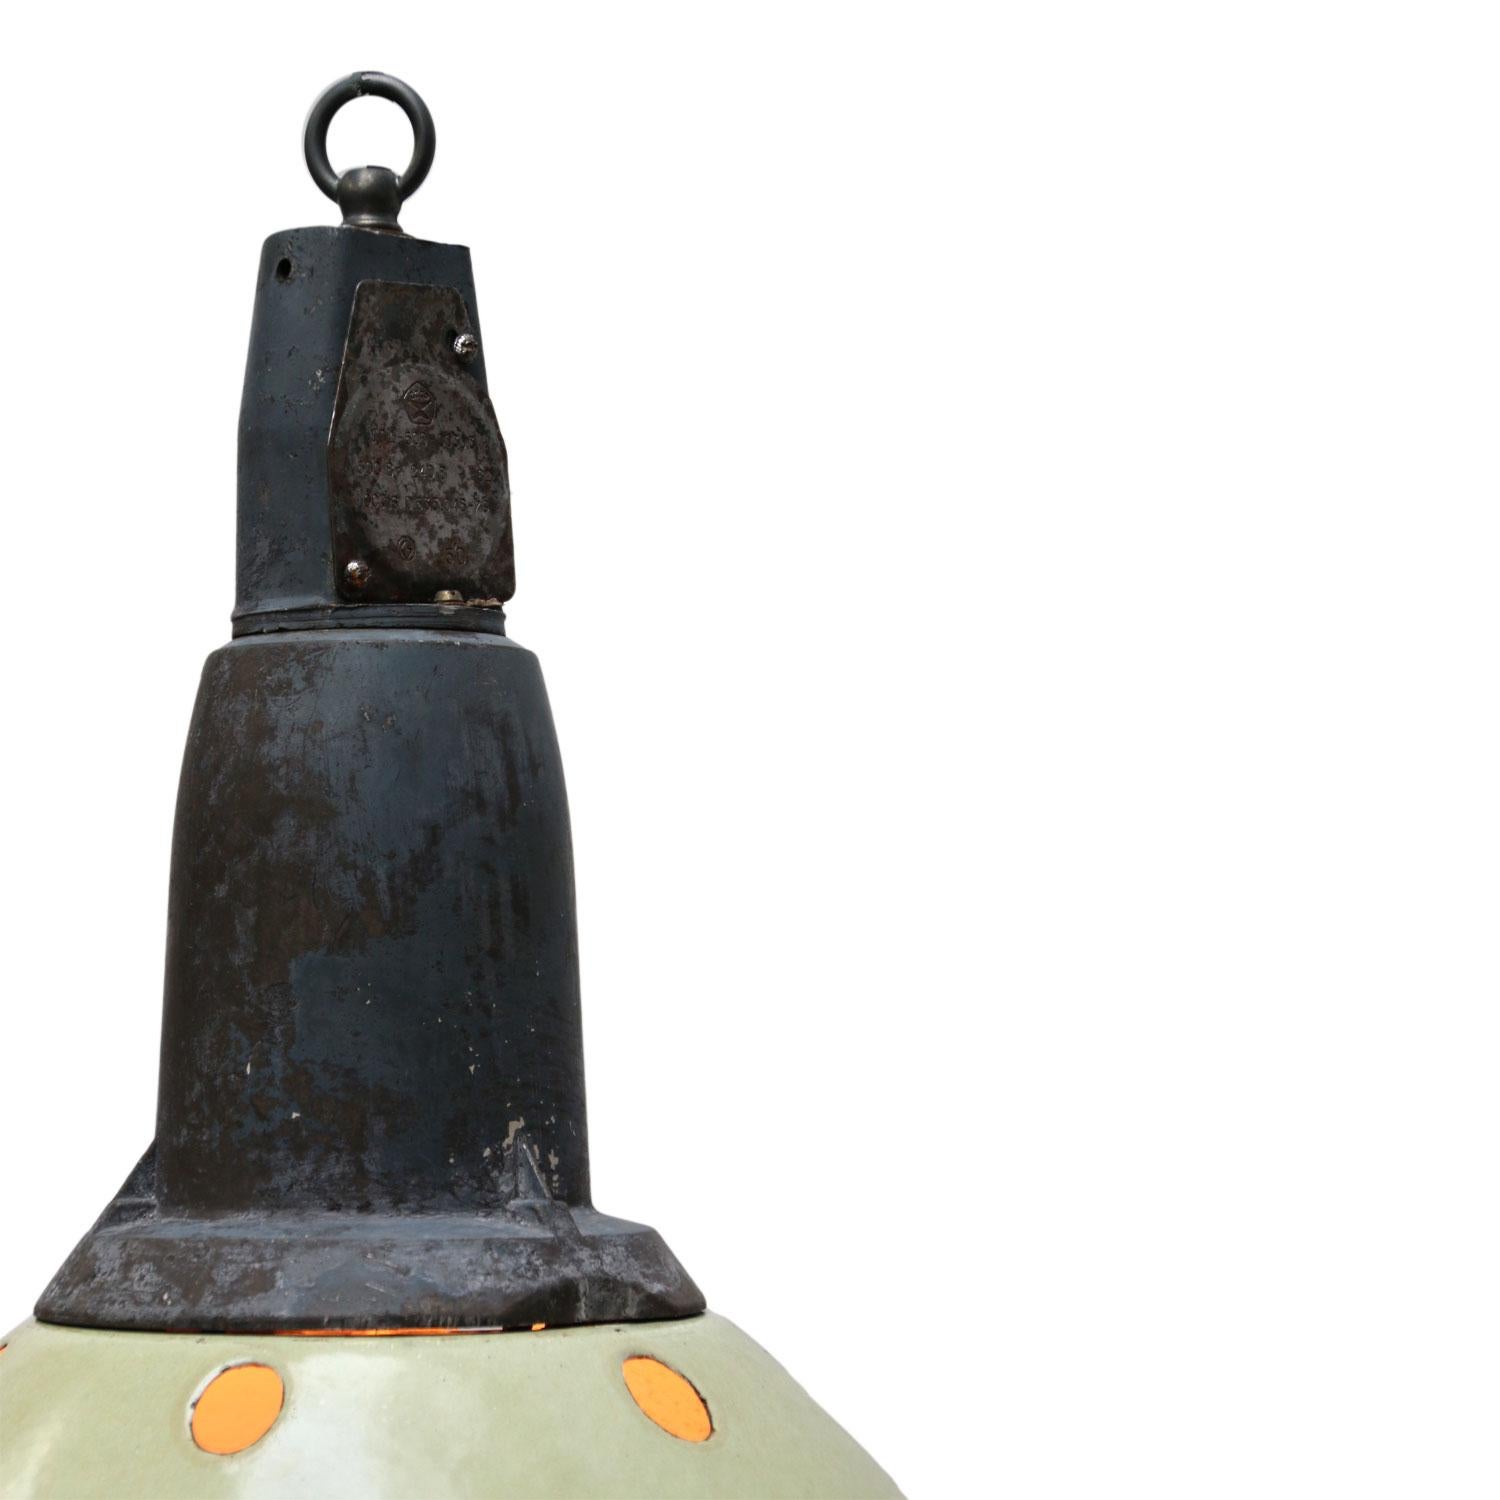 Enamel industrial pendant.
Light green enamel shade, white inside.
Dark grey cast aluminium top

Weight: 2.70 kg / 6 lb

All lamps have been made suitable by international standards for incandescent light bulbs, energy-efficient and LED bulbs.